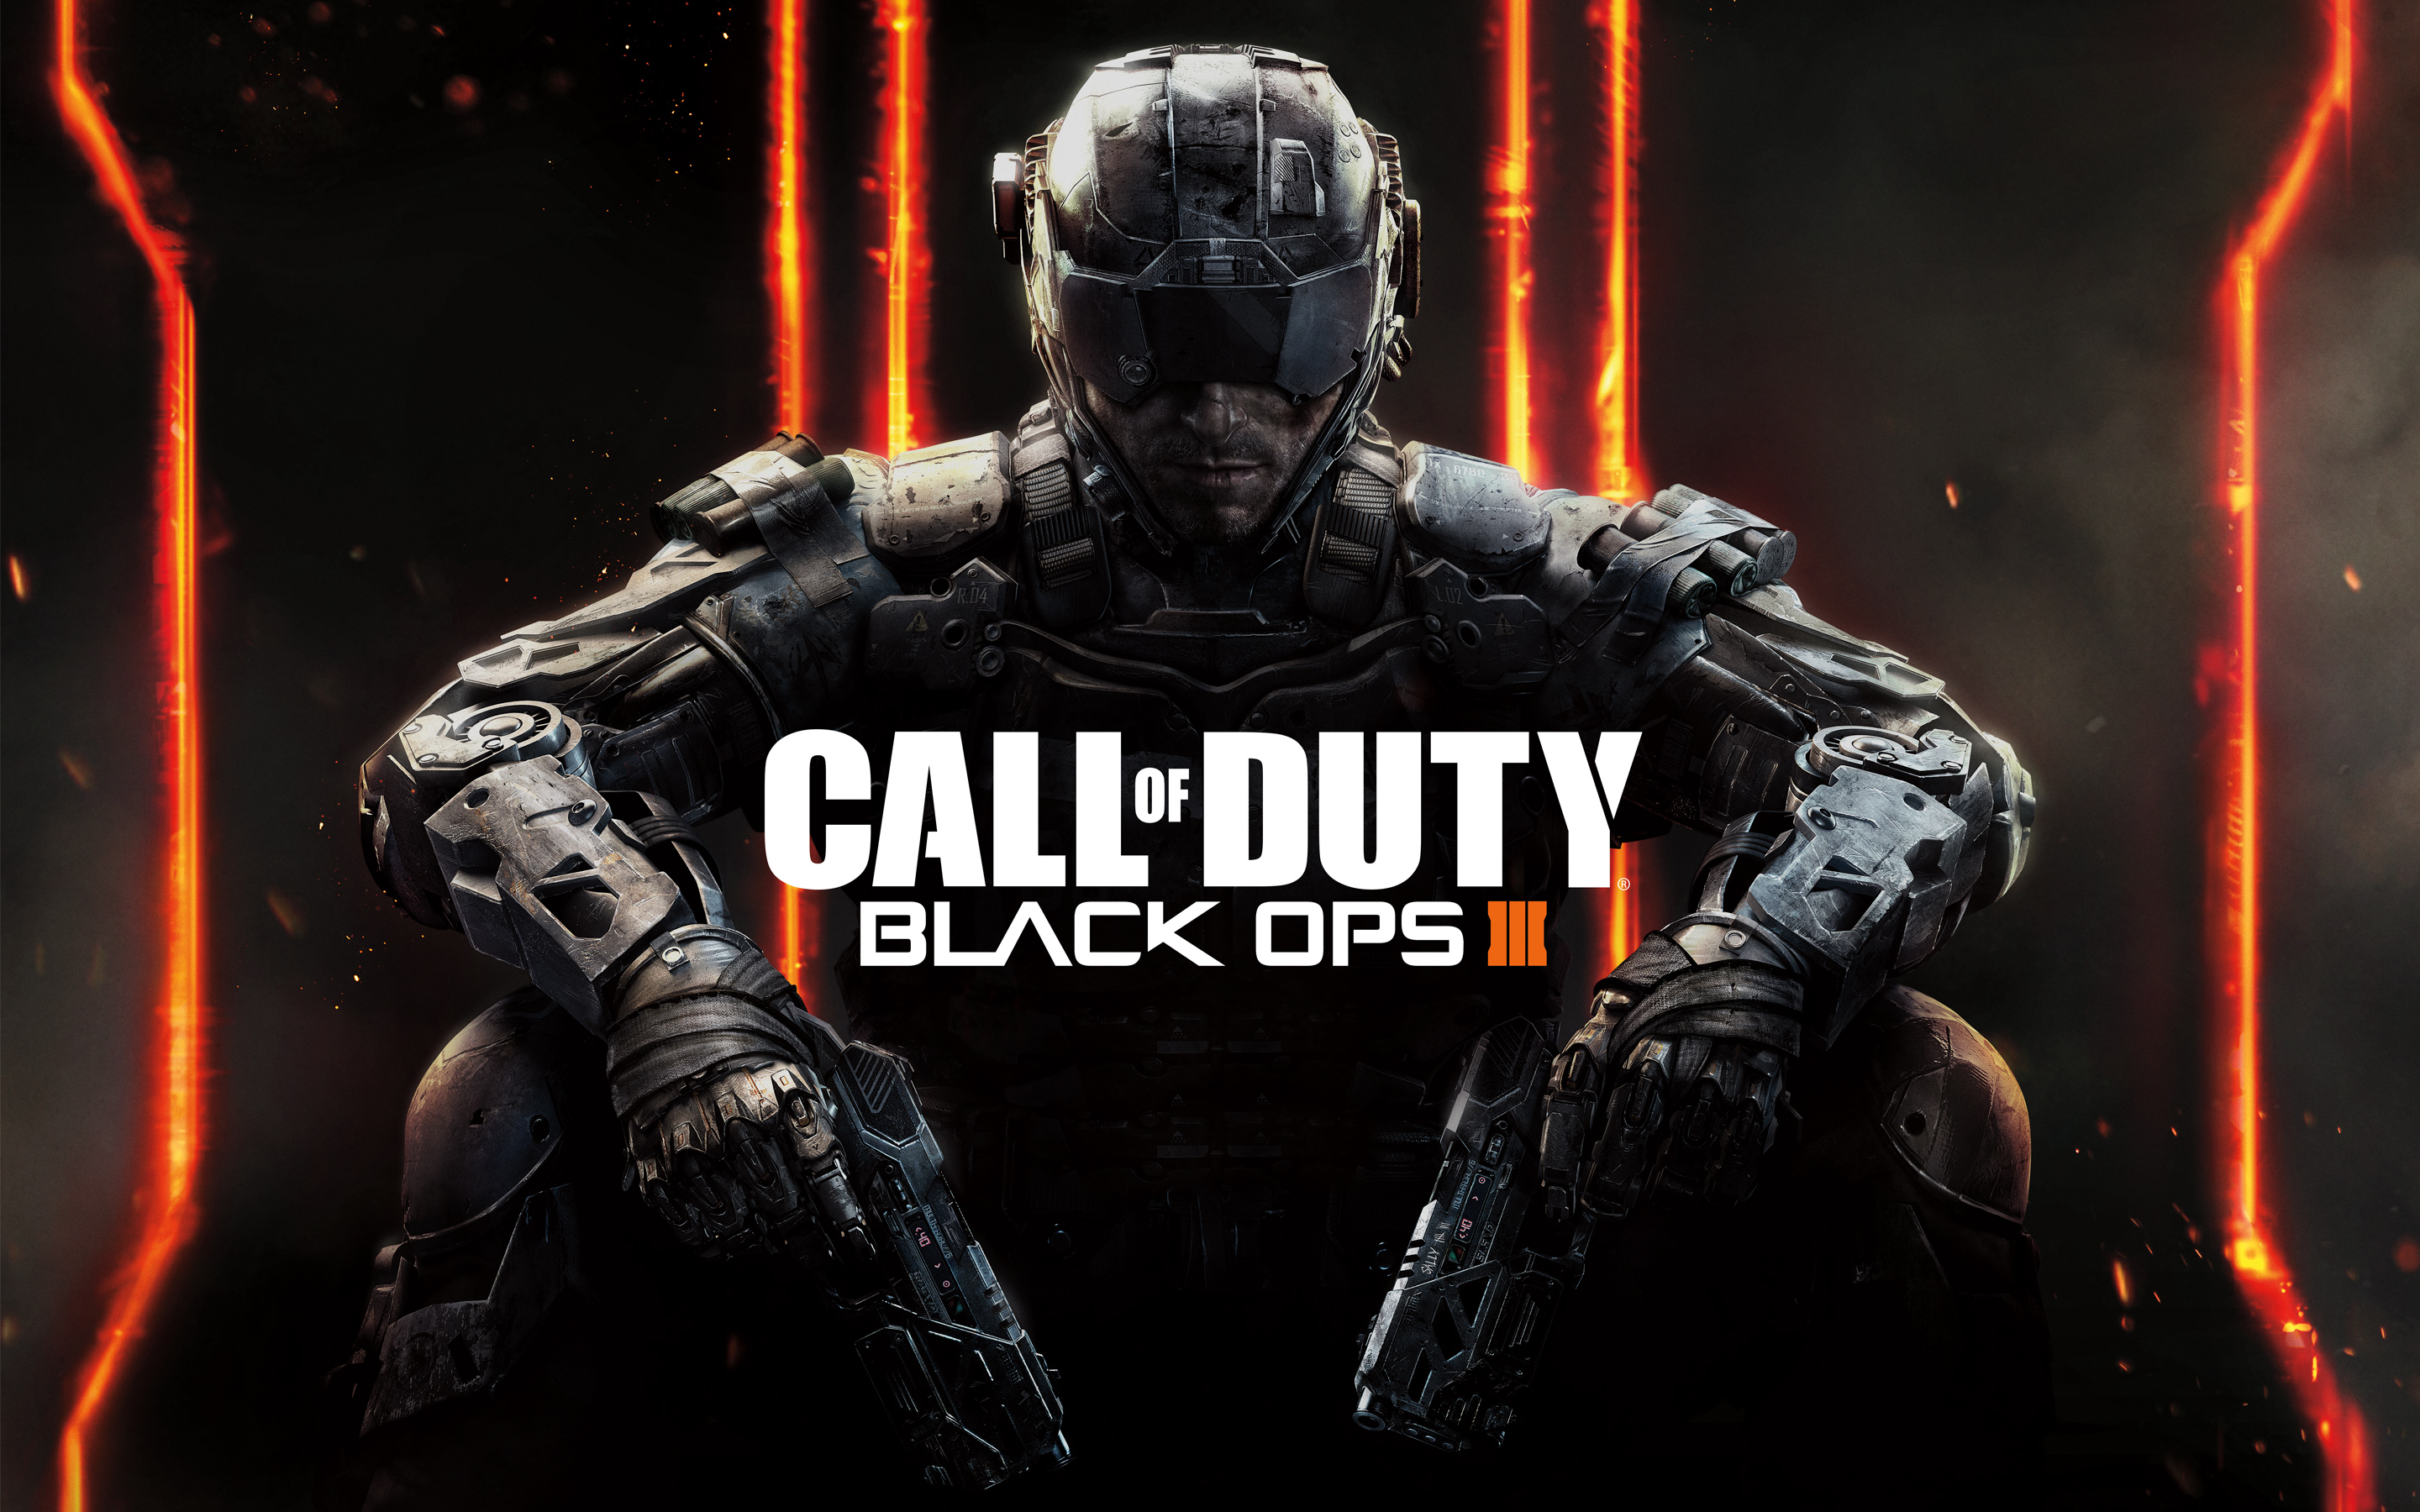 Call of Duty Black Ops III Wallpapers HD Wallpapers 2880x1800